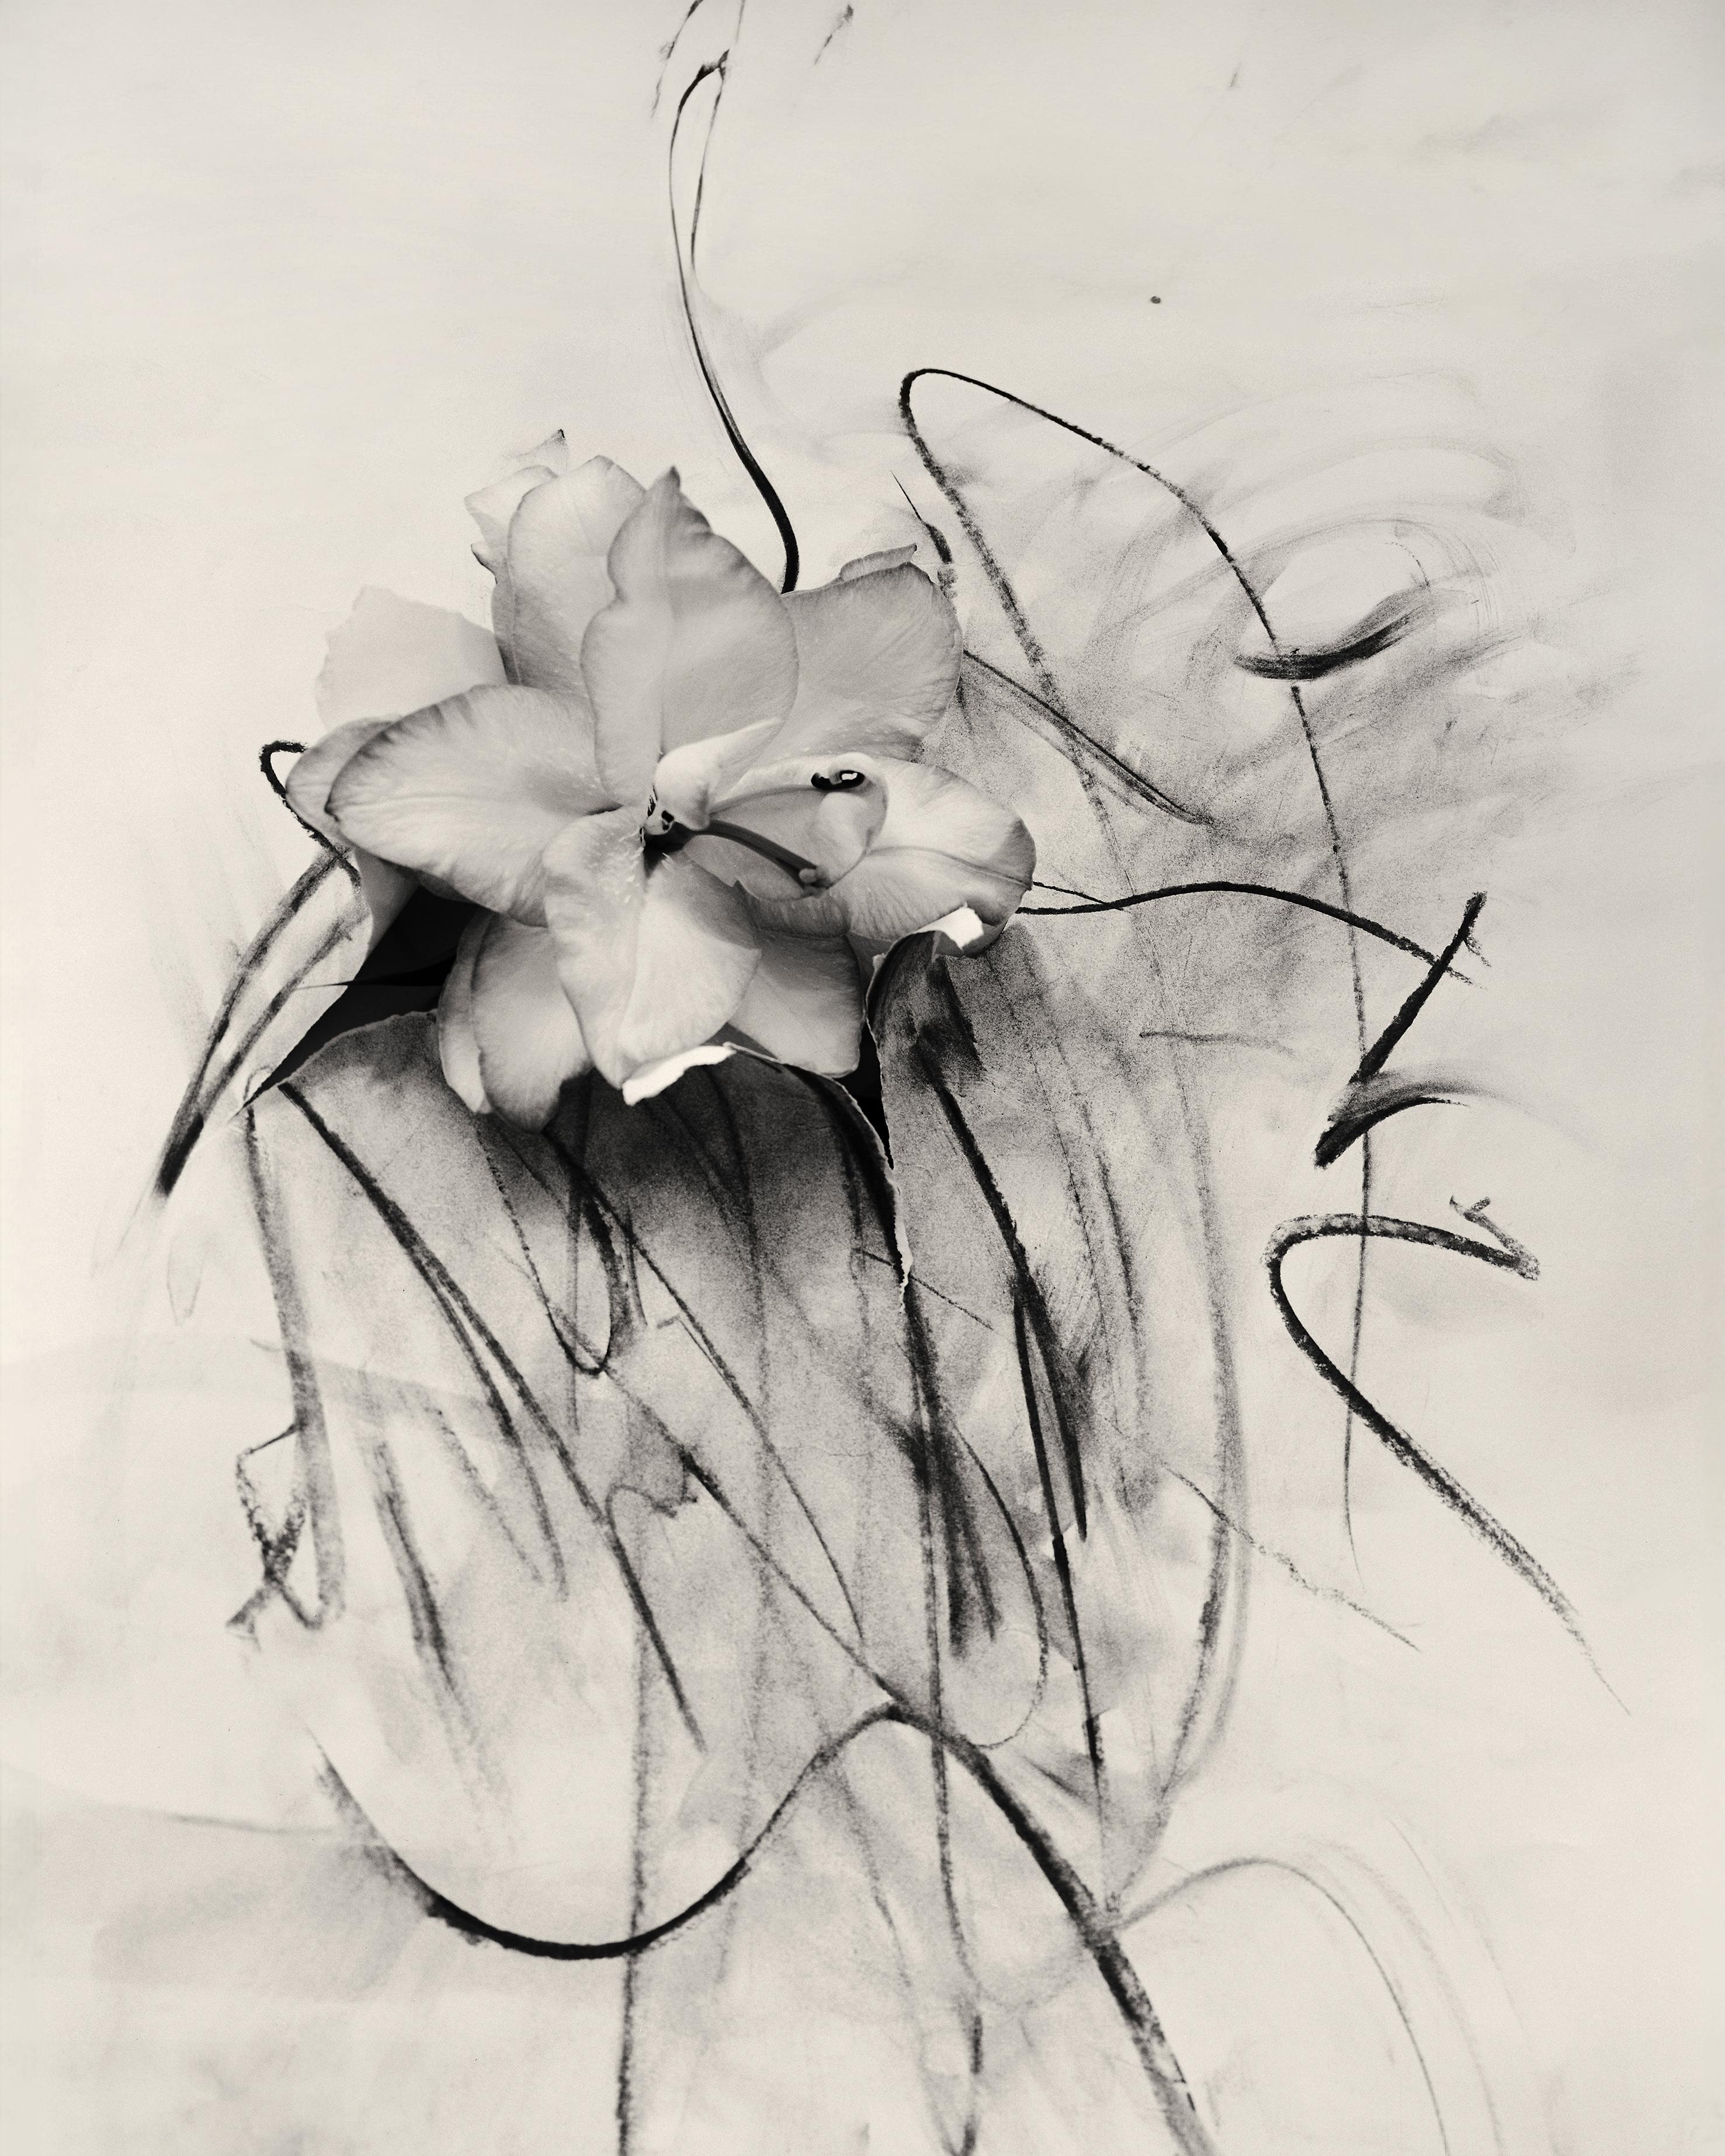 Paire de natures mortes abstraites « Lily in charcoal » et « Lily in charcoal n°2 » 8x10 - Photograph de Ugne Pouwell